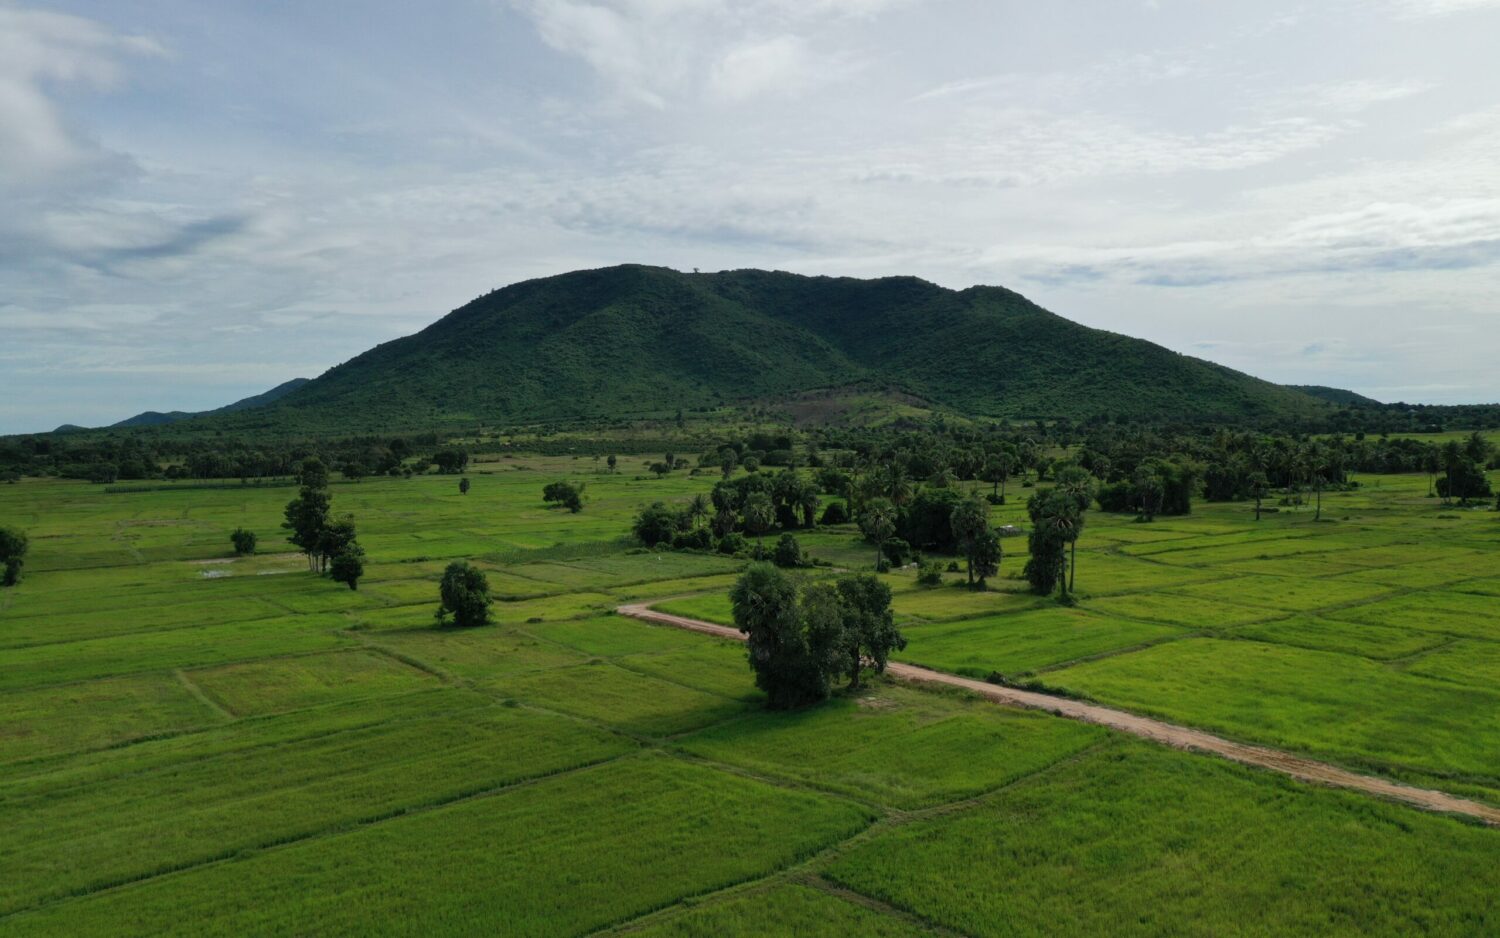 The Rui Feng plantation in Preah Vihear, pictured on October 26, 2021, covered with rice fields but little to no sugarcane. (Heng Vichet/VOD)